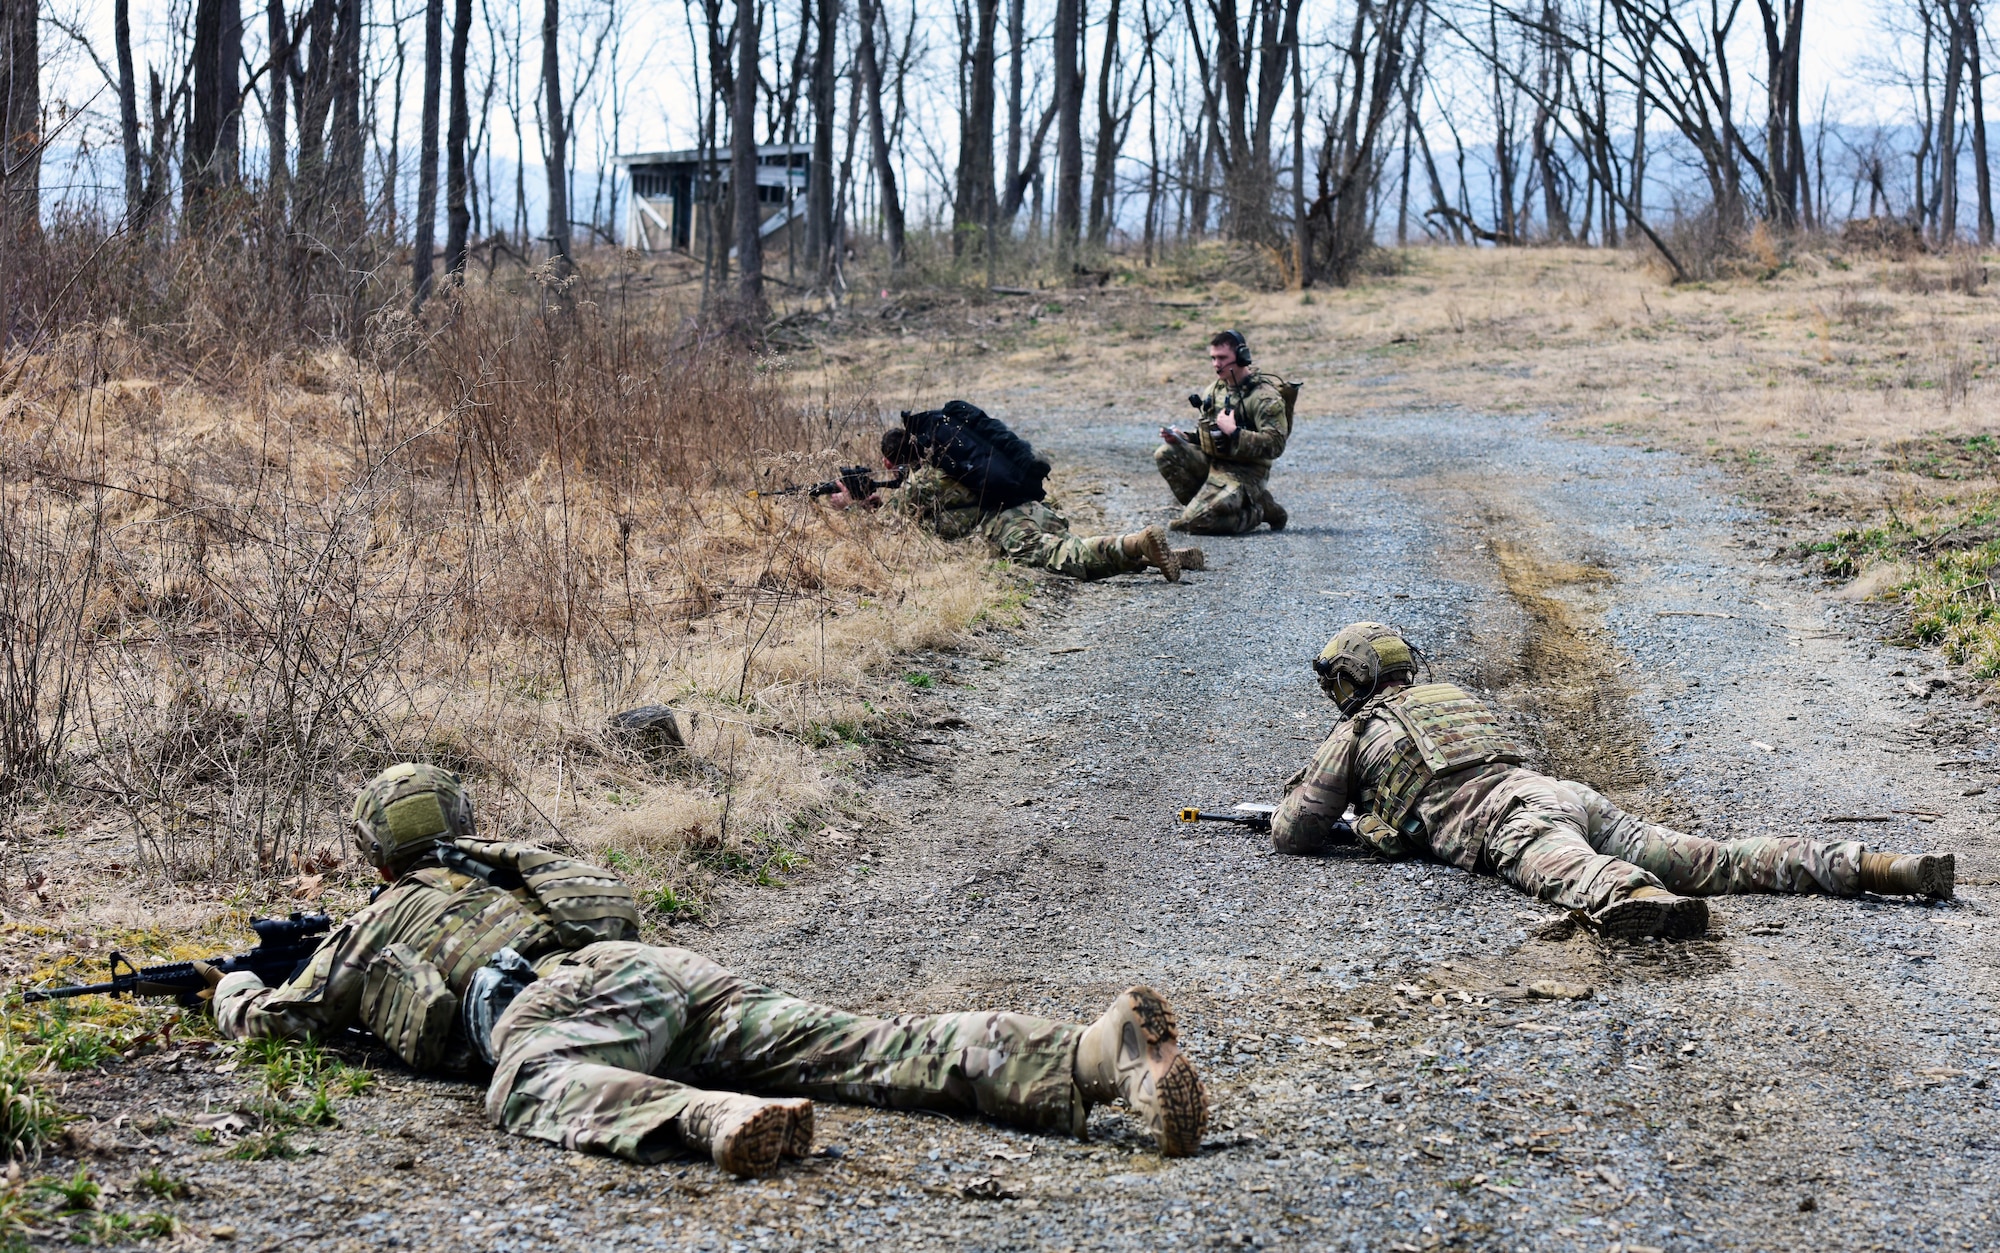 Airmen of the 148th Air Support Operations Squadron, 193rd Special Operations Wing, lay on the ground to take cover from simulated enemy fire during a Tactical Combat Casualty Care field training exercise April 6, 2019, at Fort Indiantown Gap, Annville, Pennsylvania. Airmen participating in the FTX completed three different timed scenarios in which they moved tactically through a series of unpredicted “ambushes” to provide simulated medical care for casualties. (U.S. Air National Guard photo by Staff Sgt. Rachel Loftis)